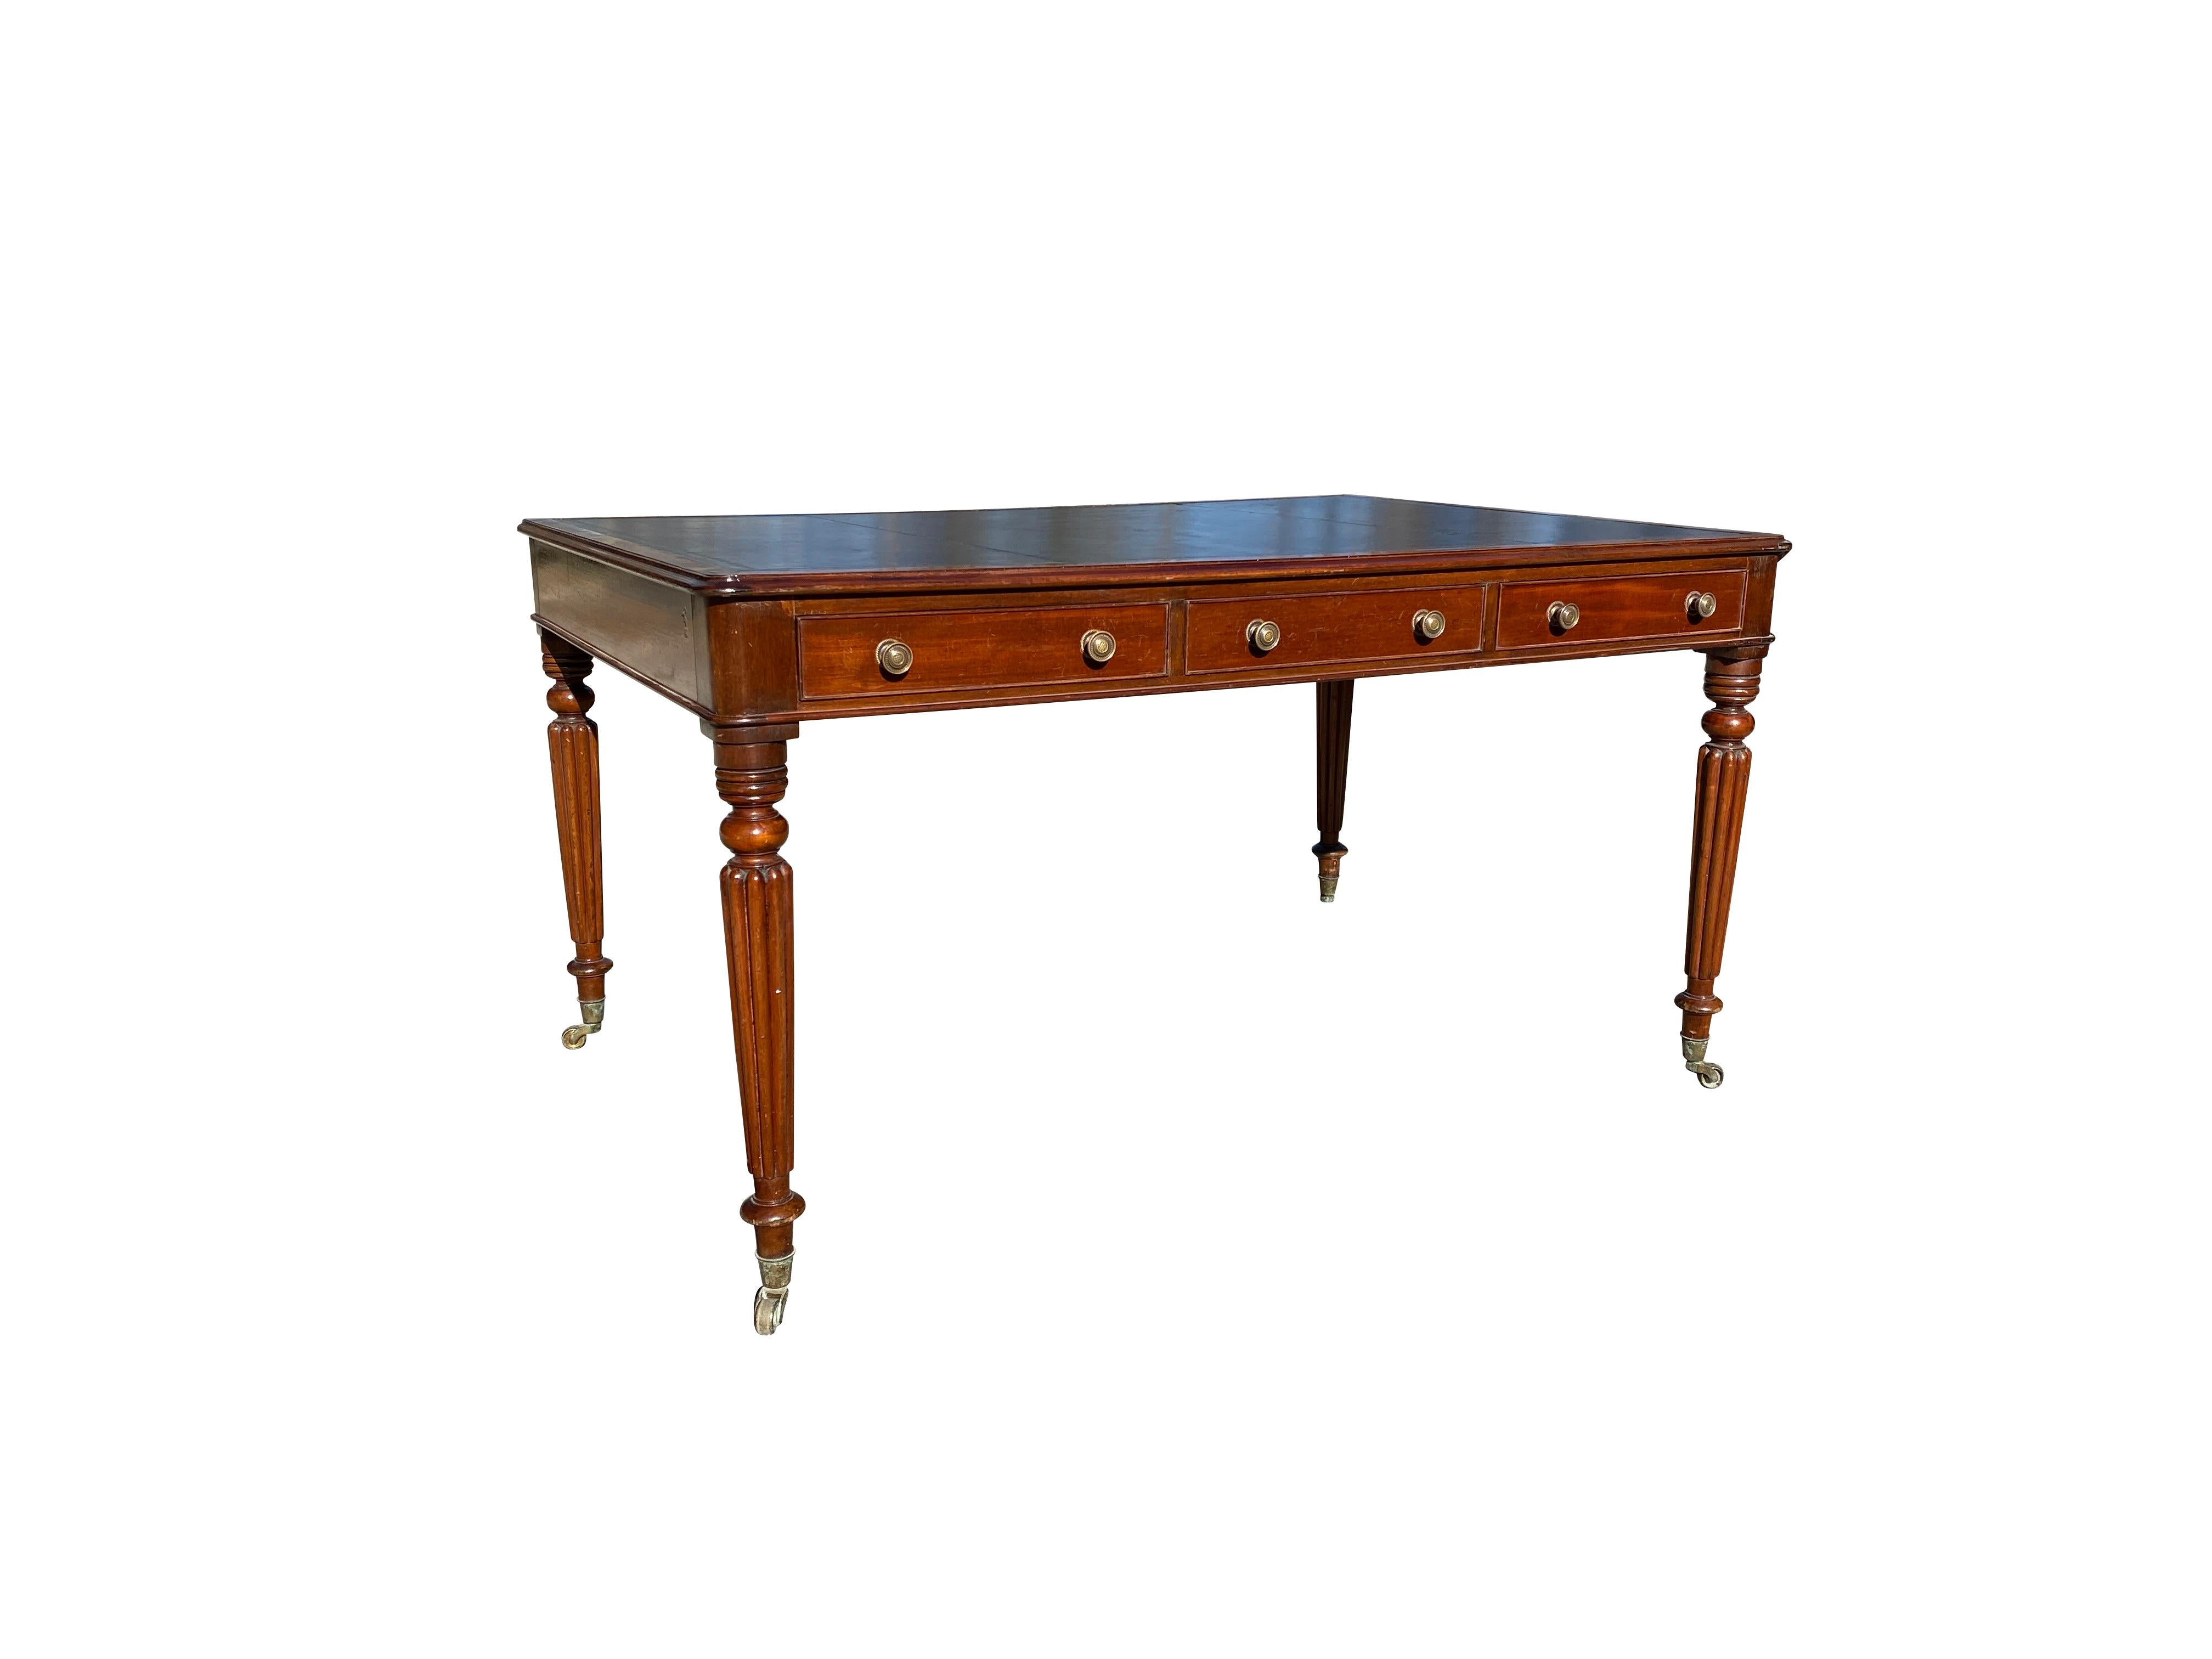 With very dark navy leather top within a banded surround over three drawers with opposing drawers on reverse, raised on circular tapered reeded legs, ending on cup casters. The leather top pictured is much lighter than it actually is.